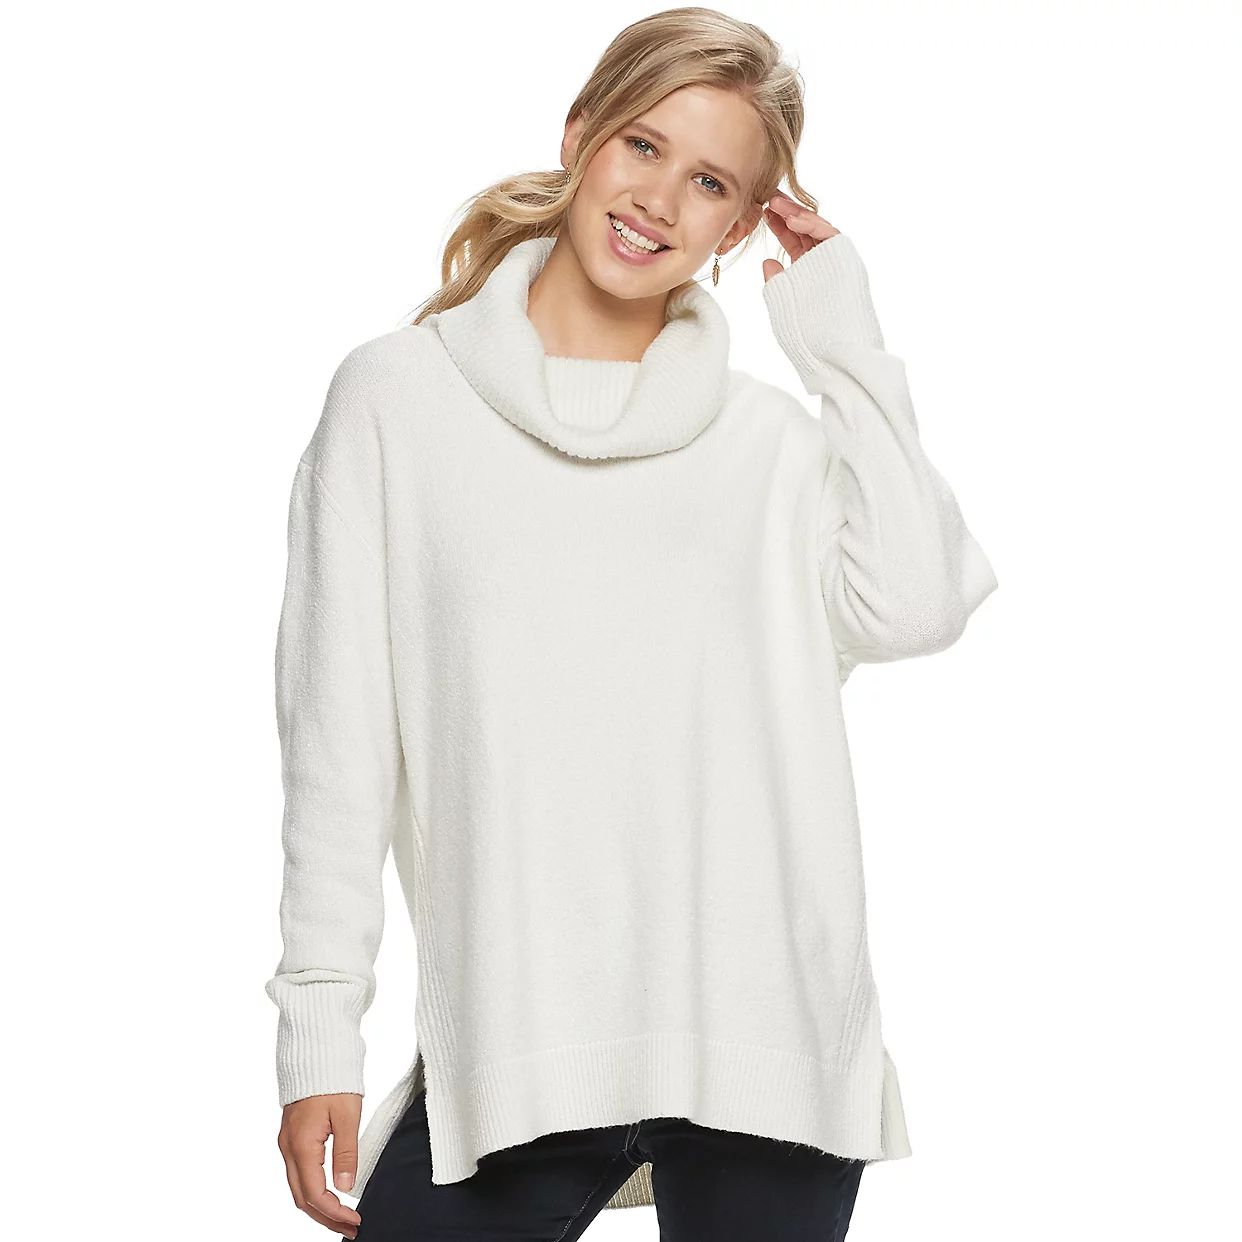 Juniors' SO Mossy Cowlneck Tunic | Kohl's